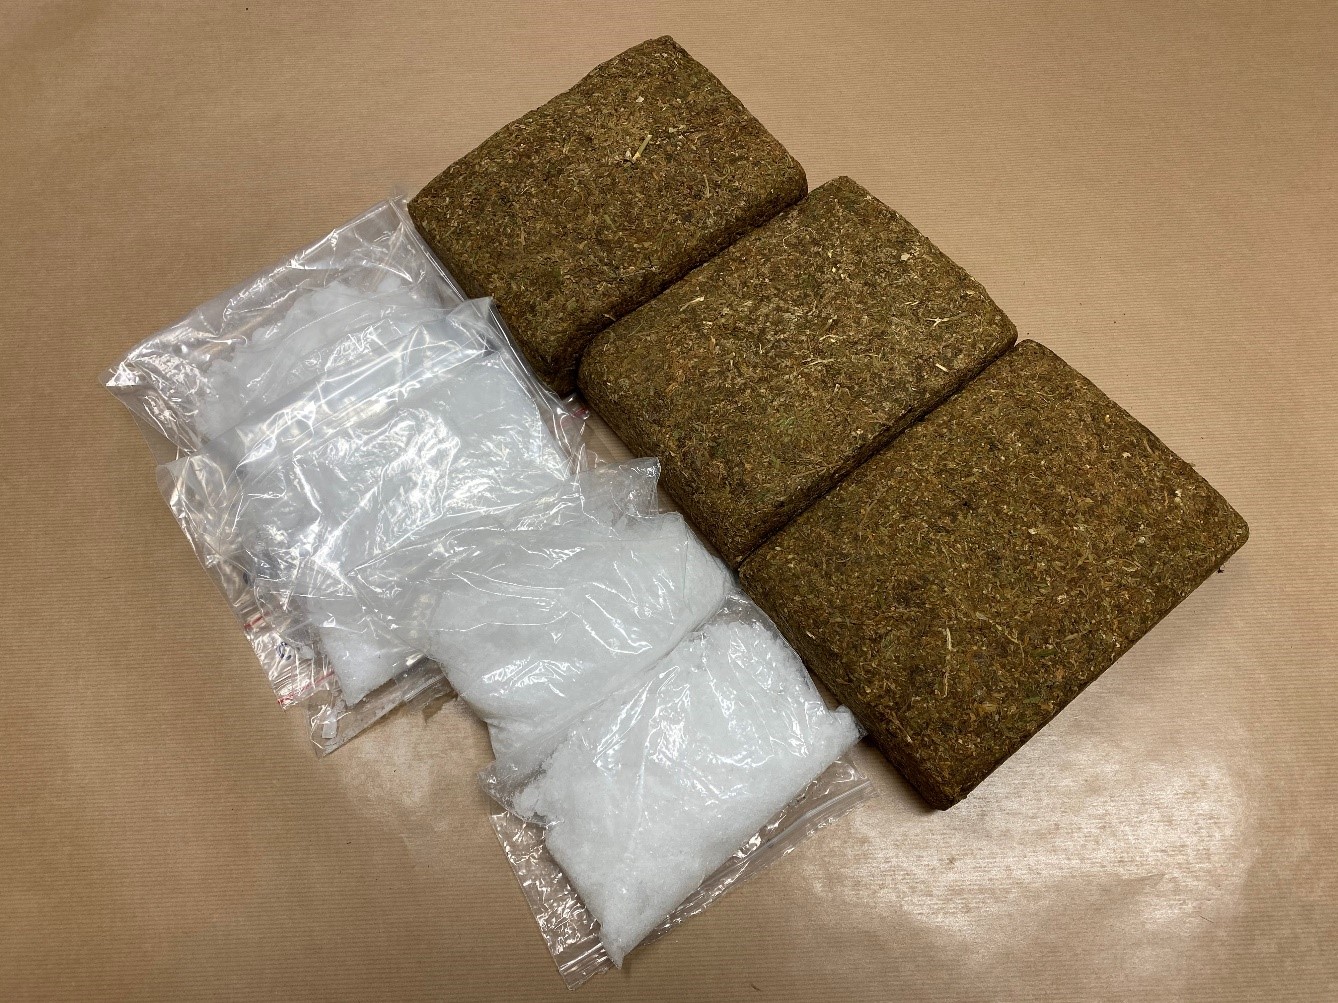 Photos 3 (CNB) – A total of about 1,000g of ‘Ice’ and about 3,000g of cannabis seized in the vicinity of Kranji Loop on 7 September 2020.